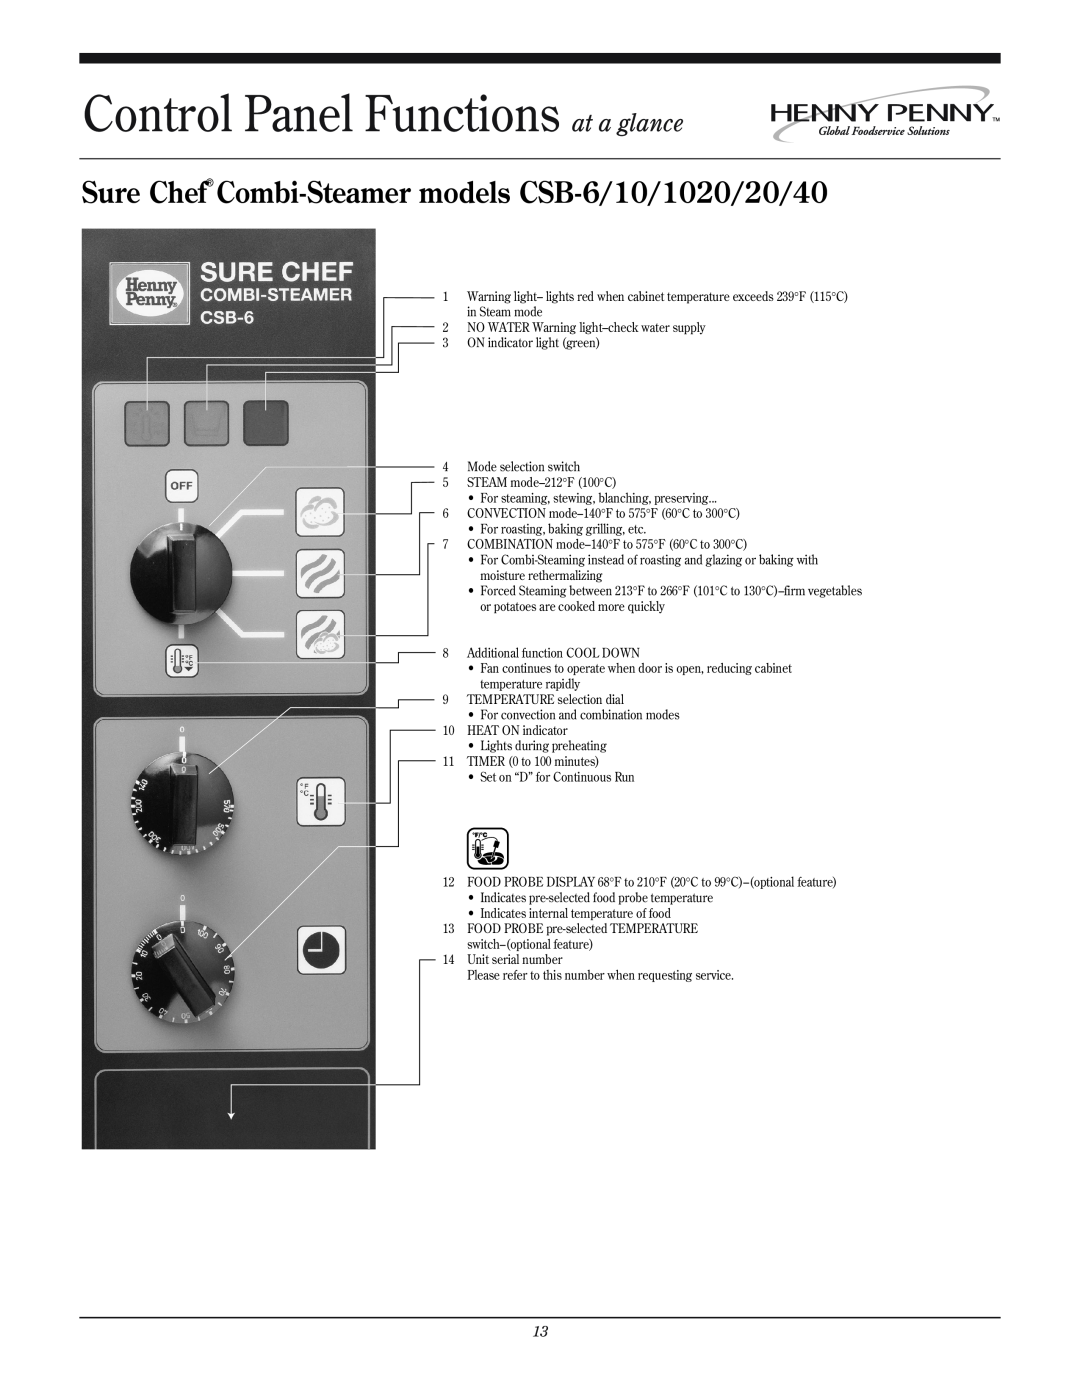 Henny Penny CSG manual Sure Chef Combi-Steamer models CSB-6/10/1020/20/40, Control Panel Functions at a glance 